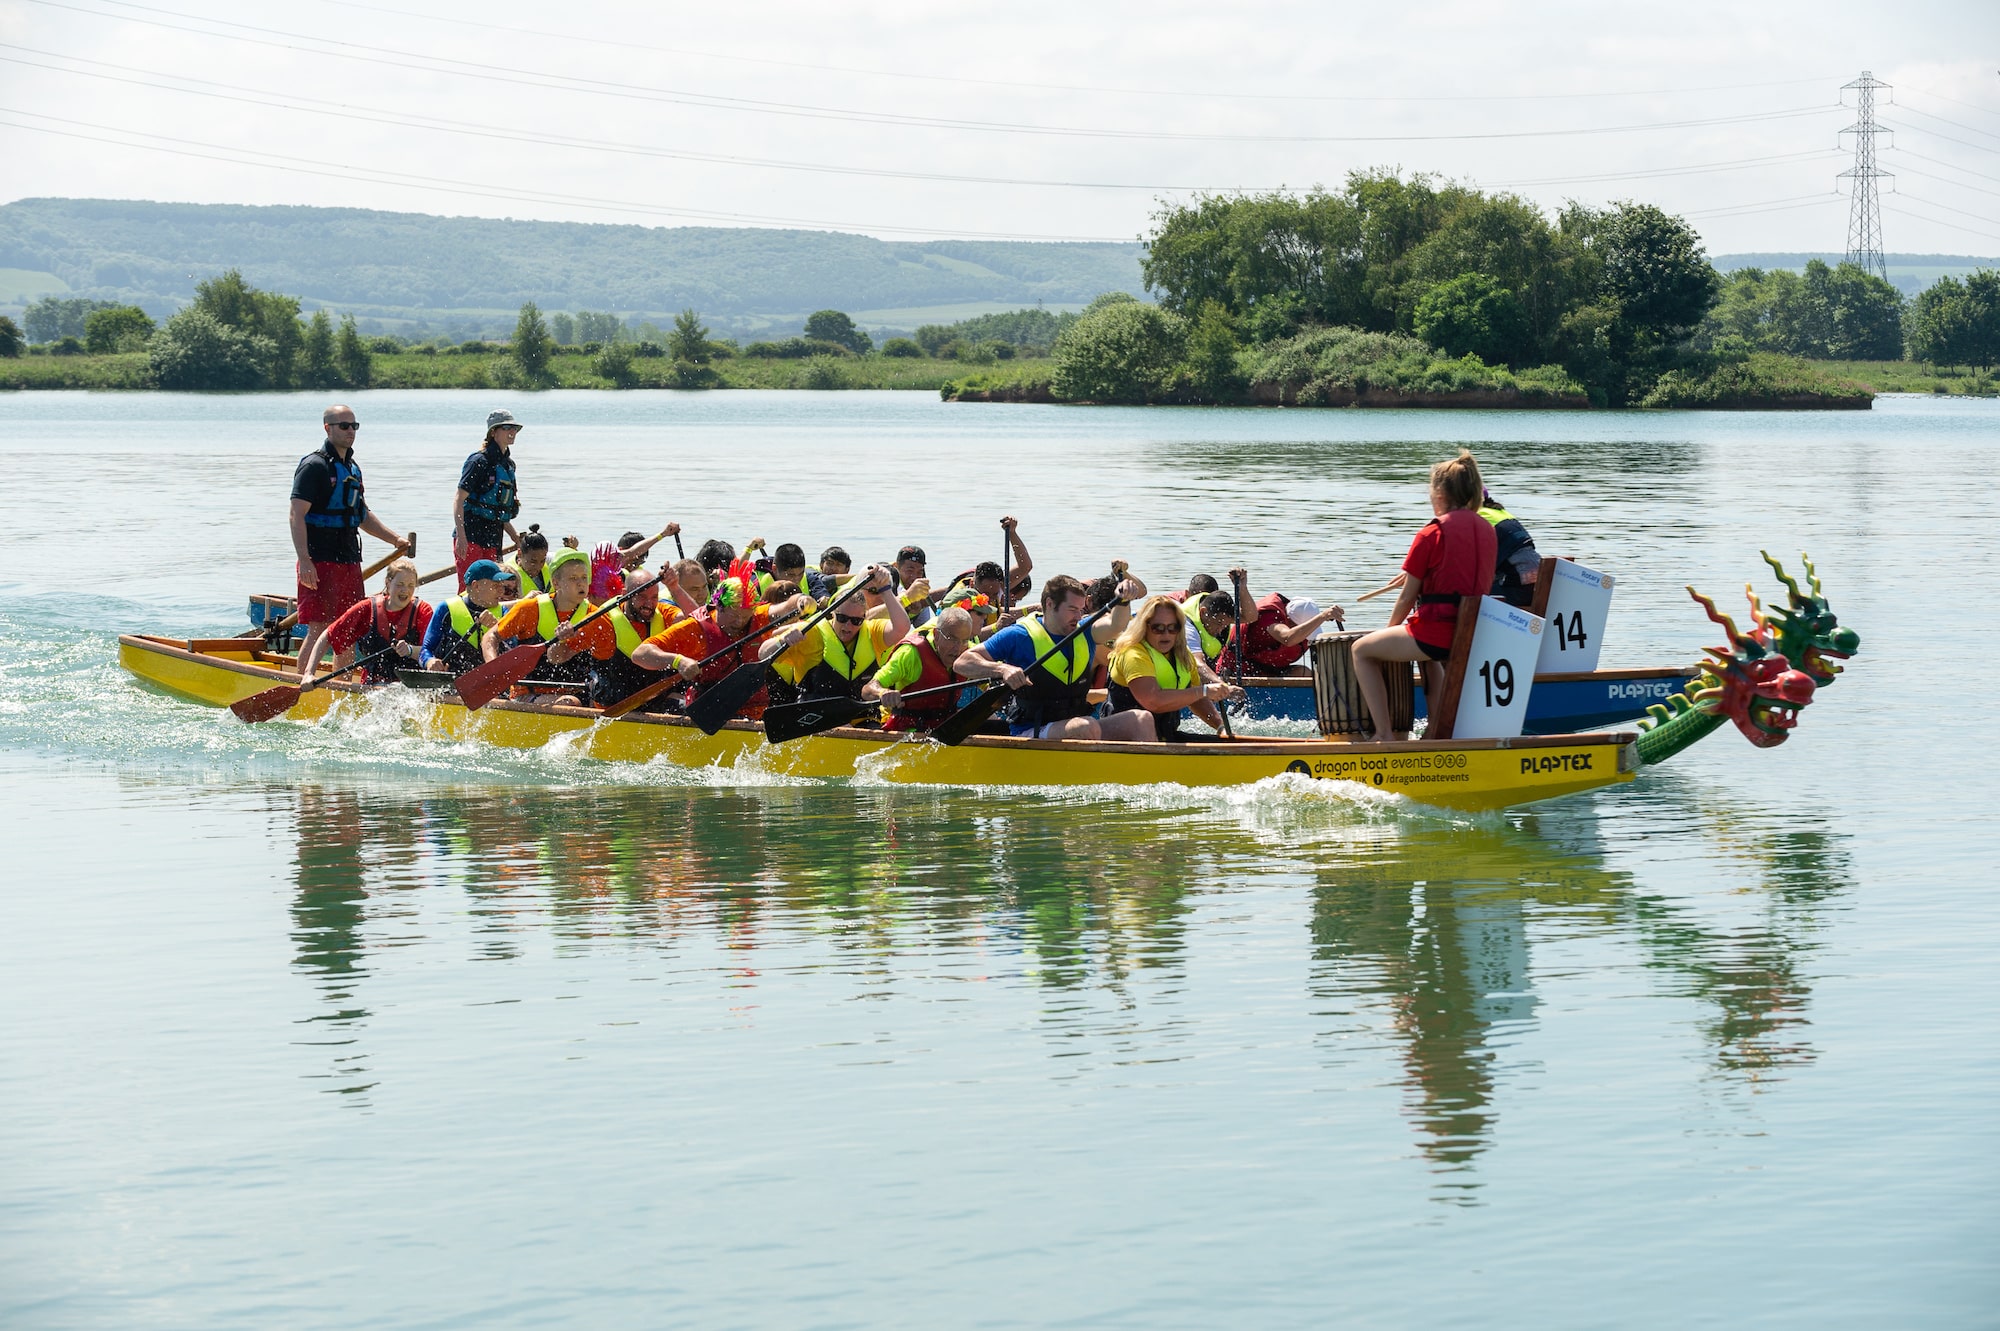 Two dragon boats filled with people rowing, neck and neck in the race